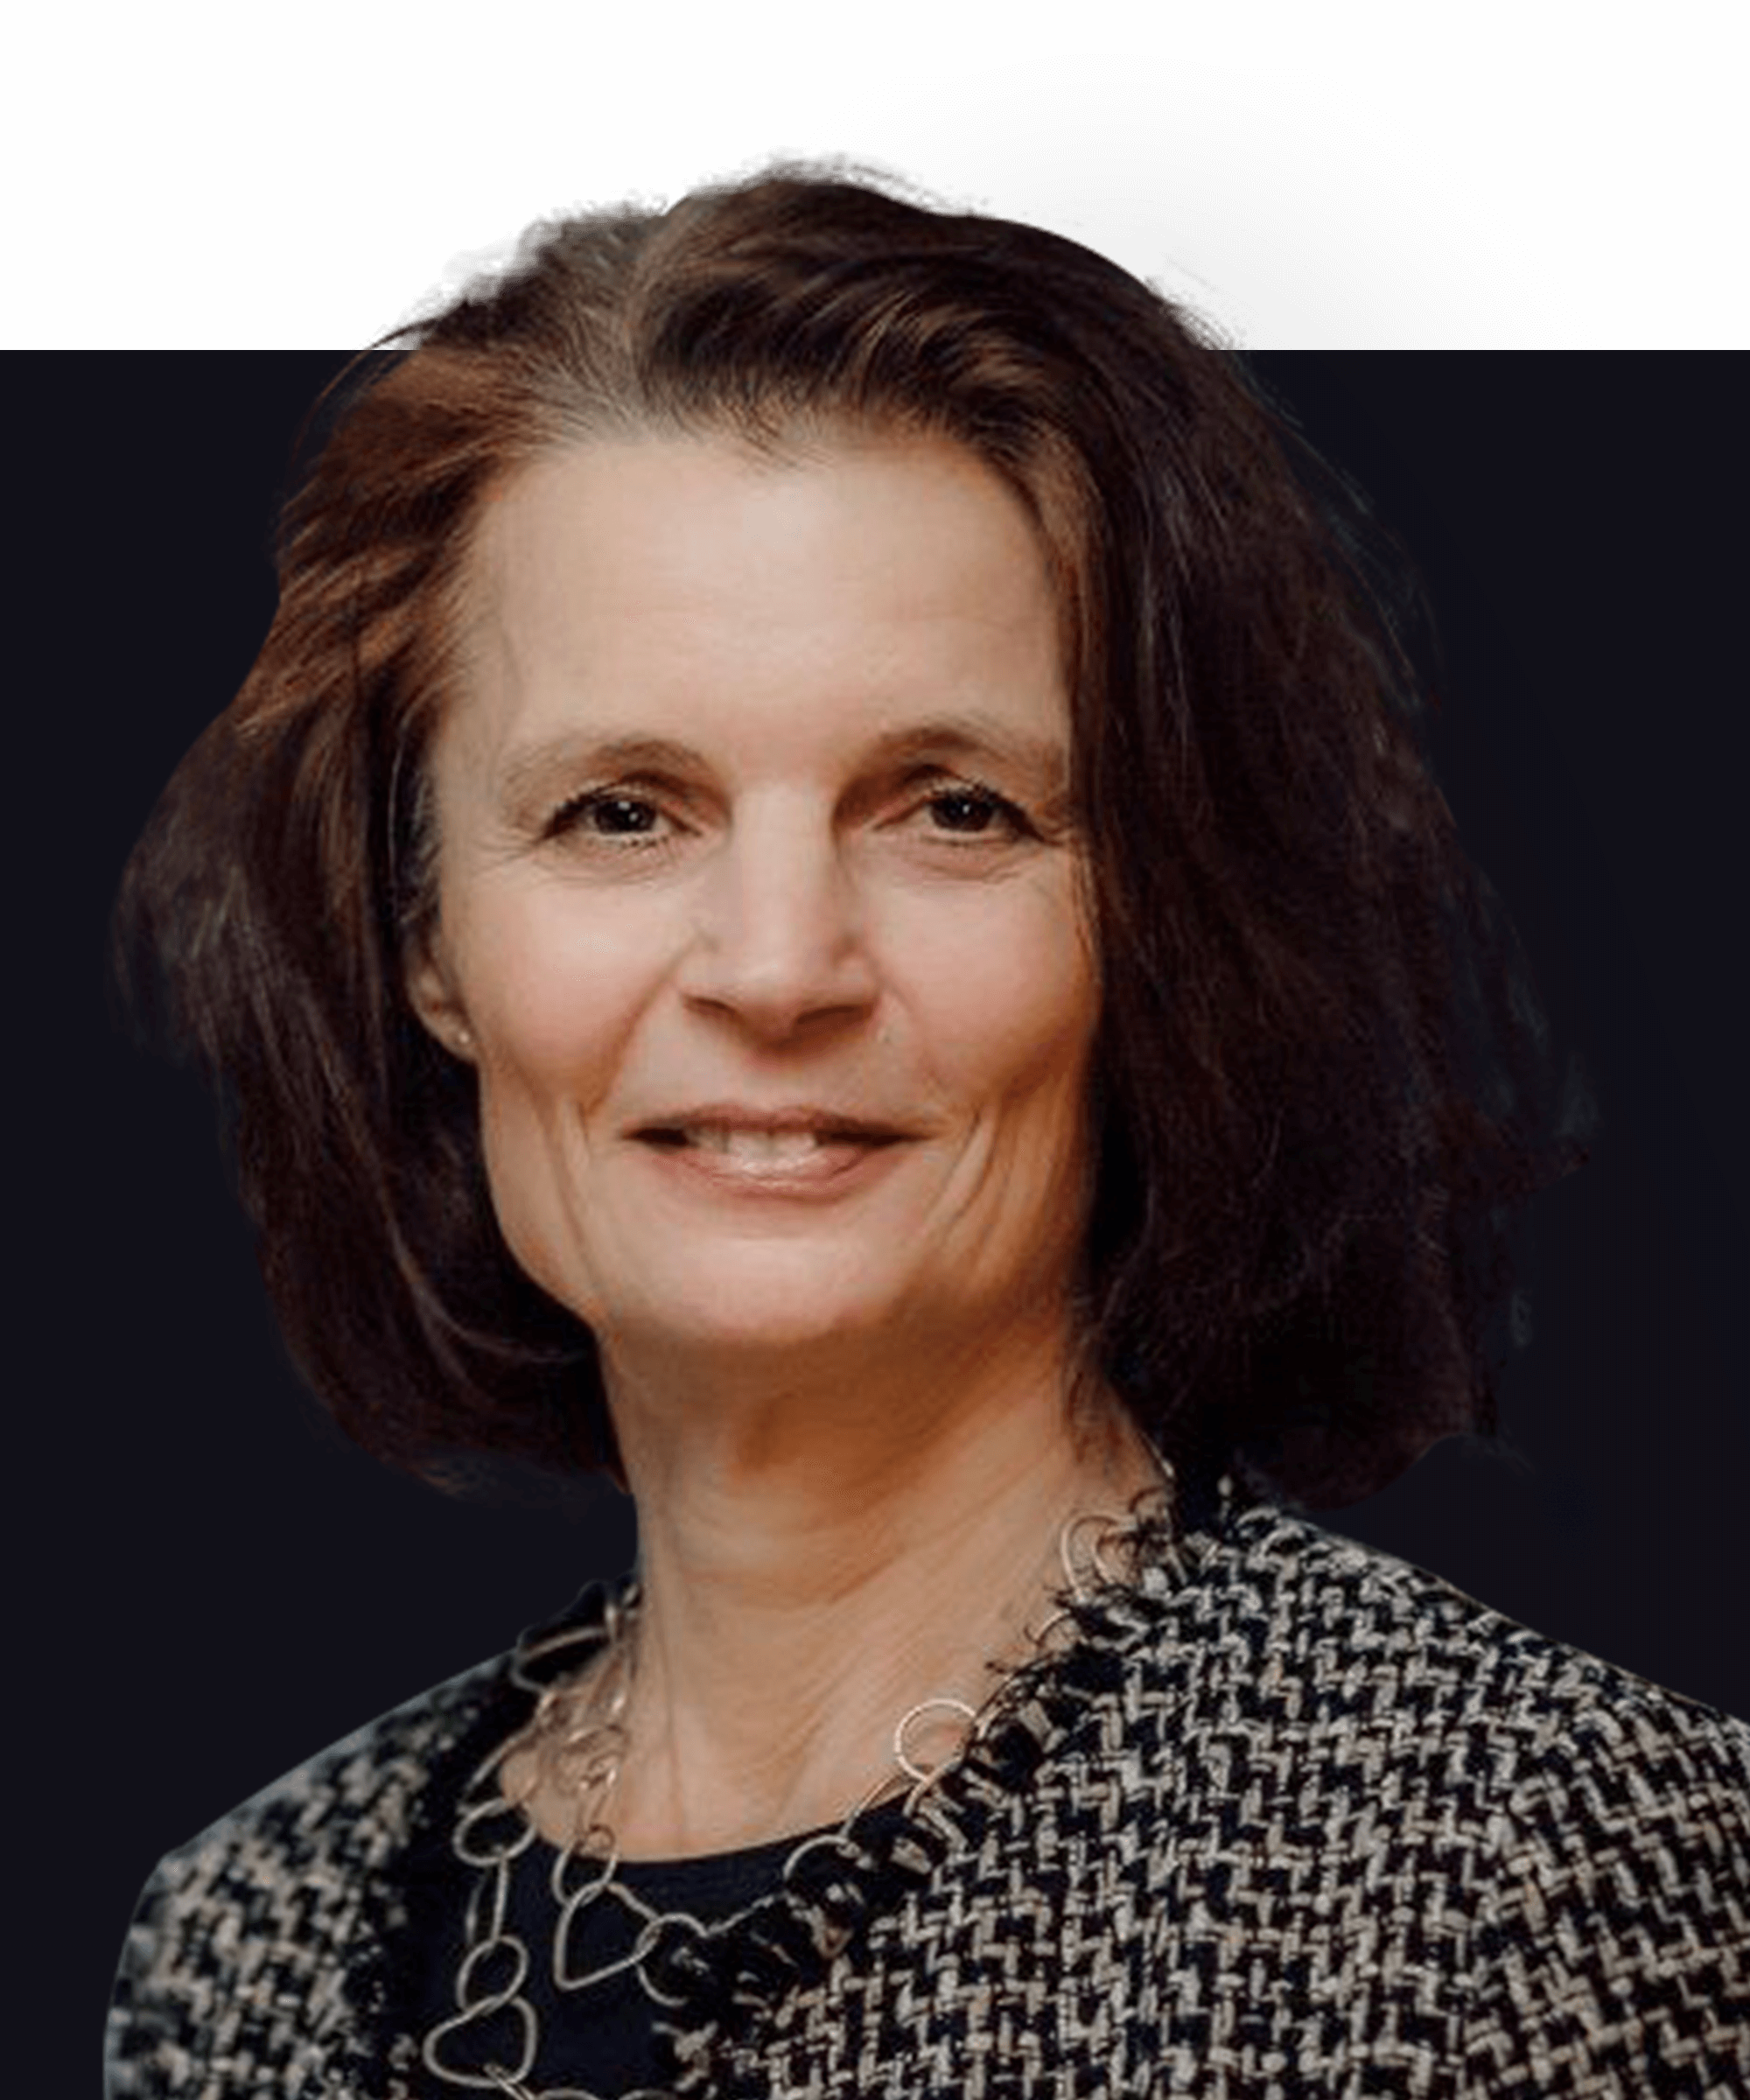 Head shot of German Managing Director Rosmarie Dammler. She is a Caucasian woman with short brown hair and dark eyes. She is wearing a smart jacket as she smiles at the camera.